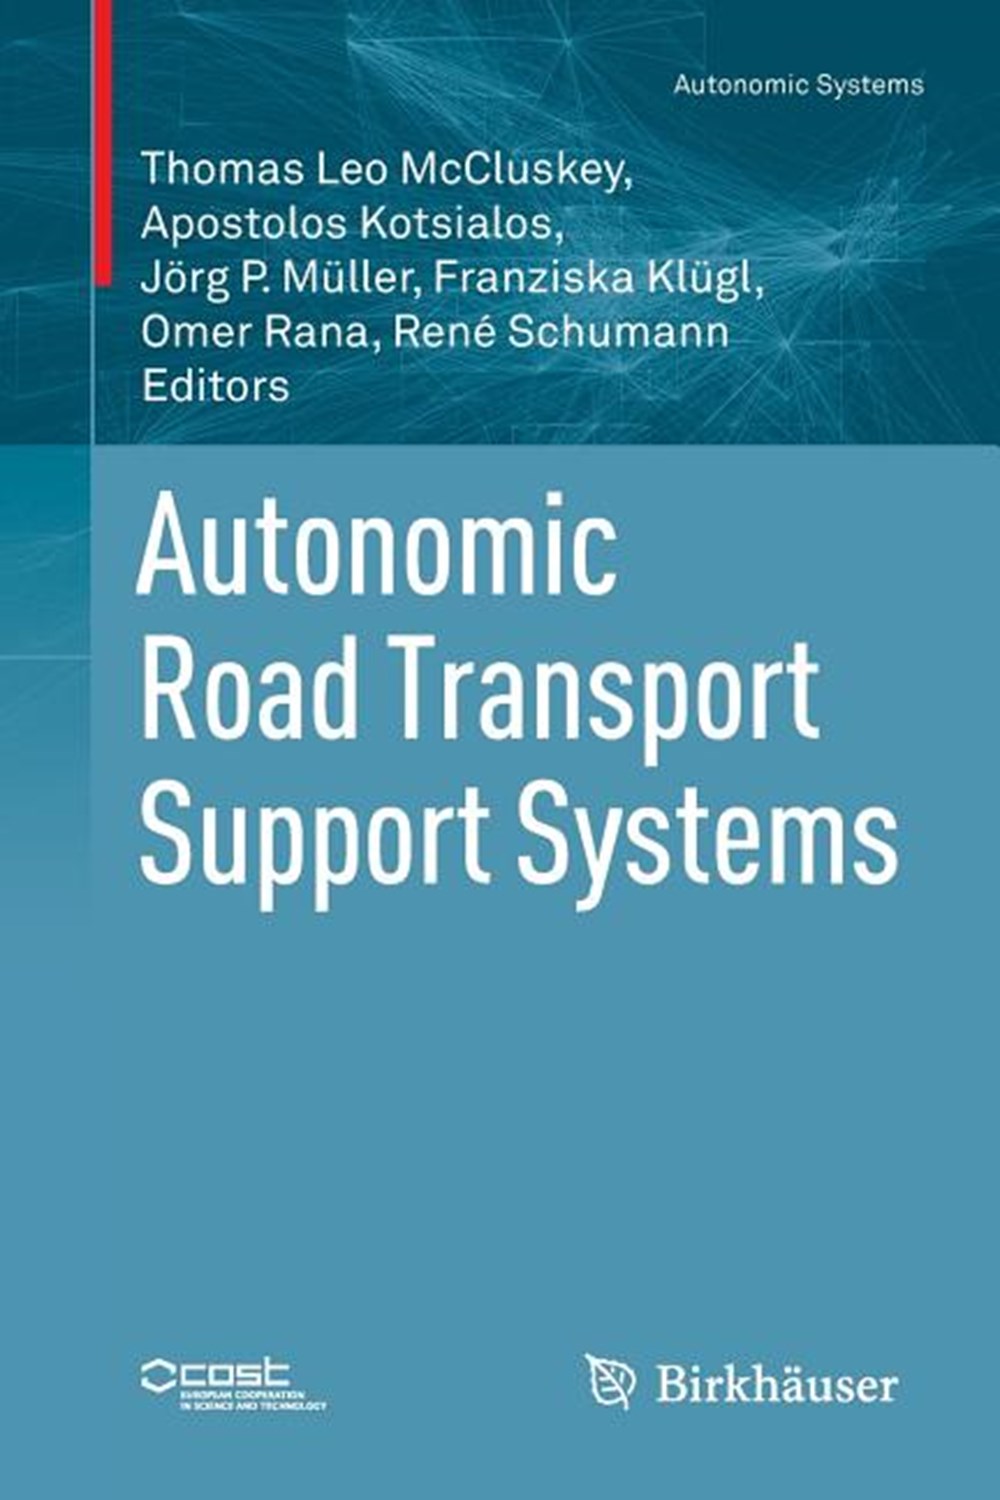 Autonomic Road Transport Support Systems (2016)